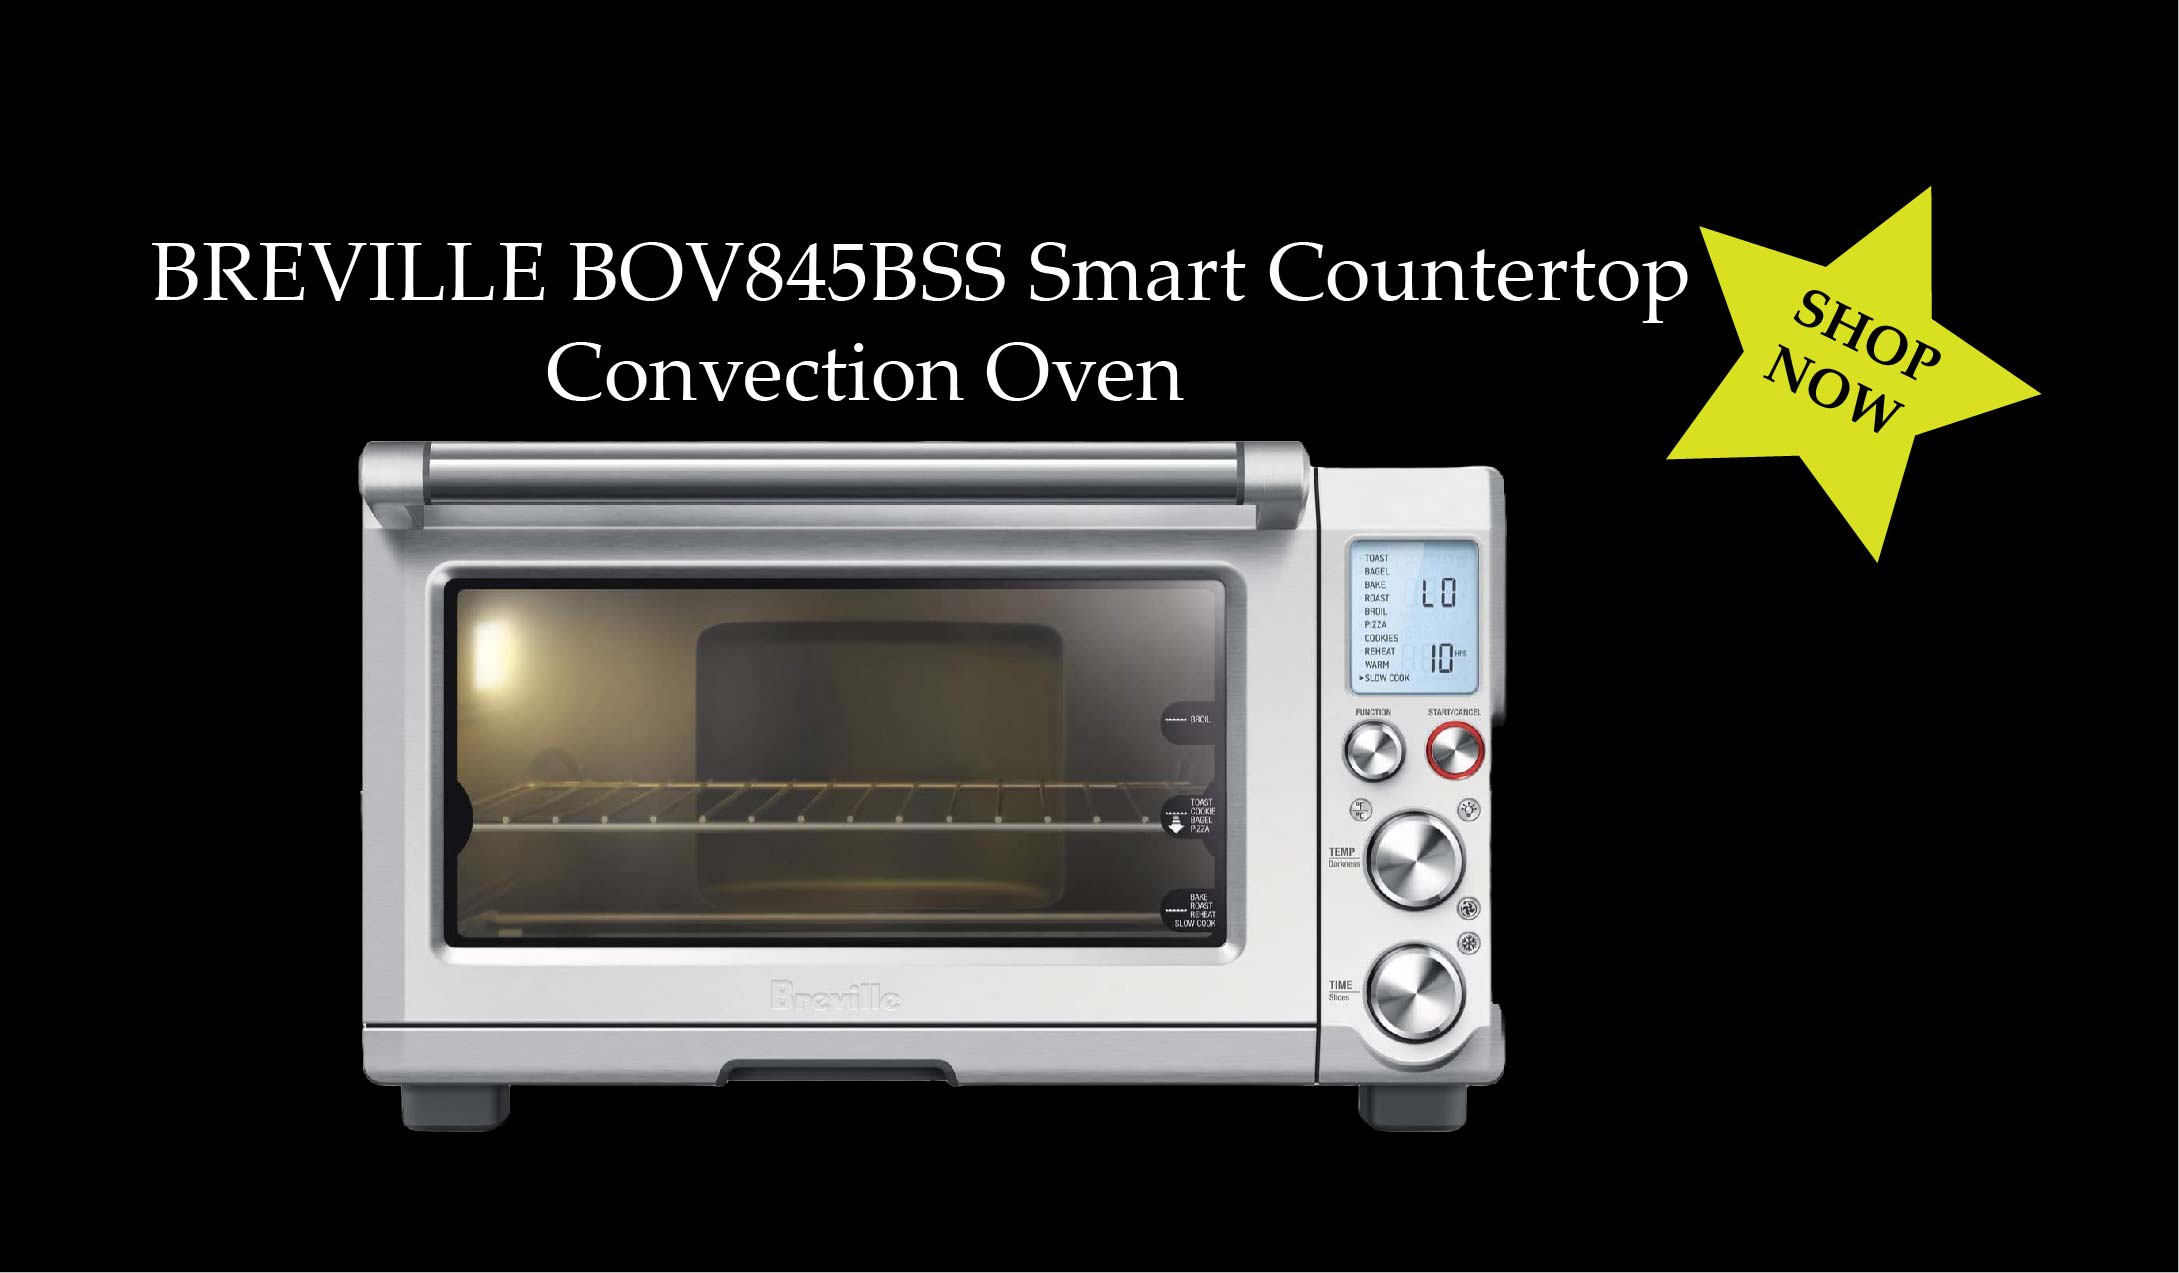 Breville BOV845BSS smart countertop convection oven with black background